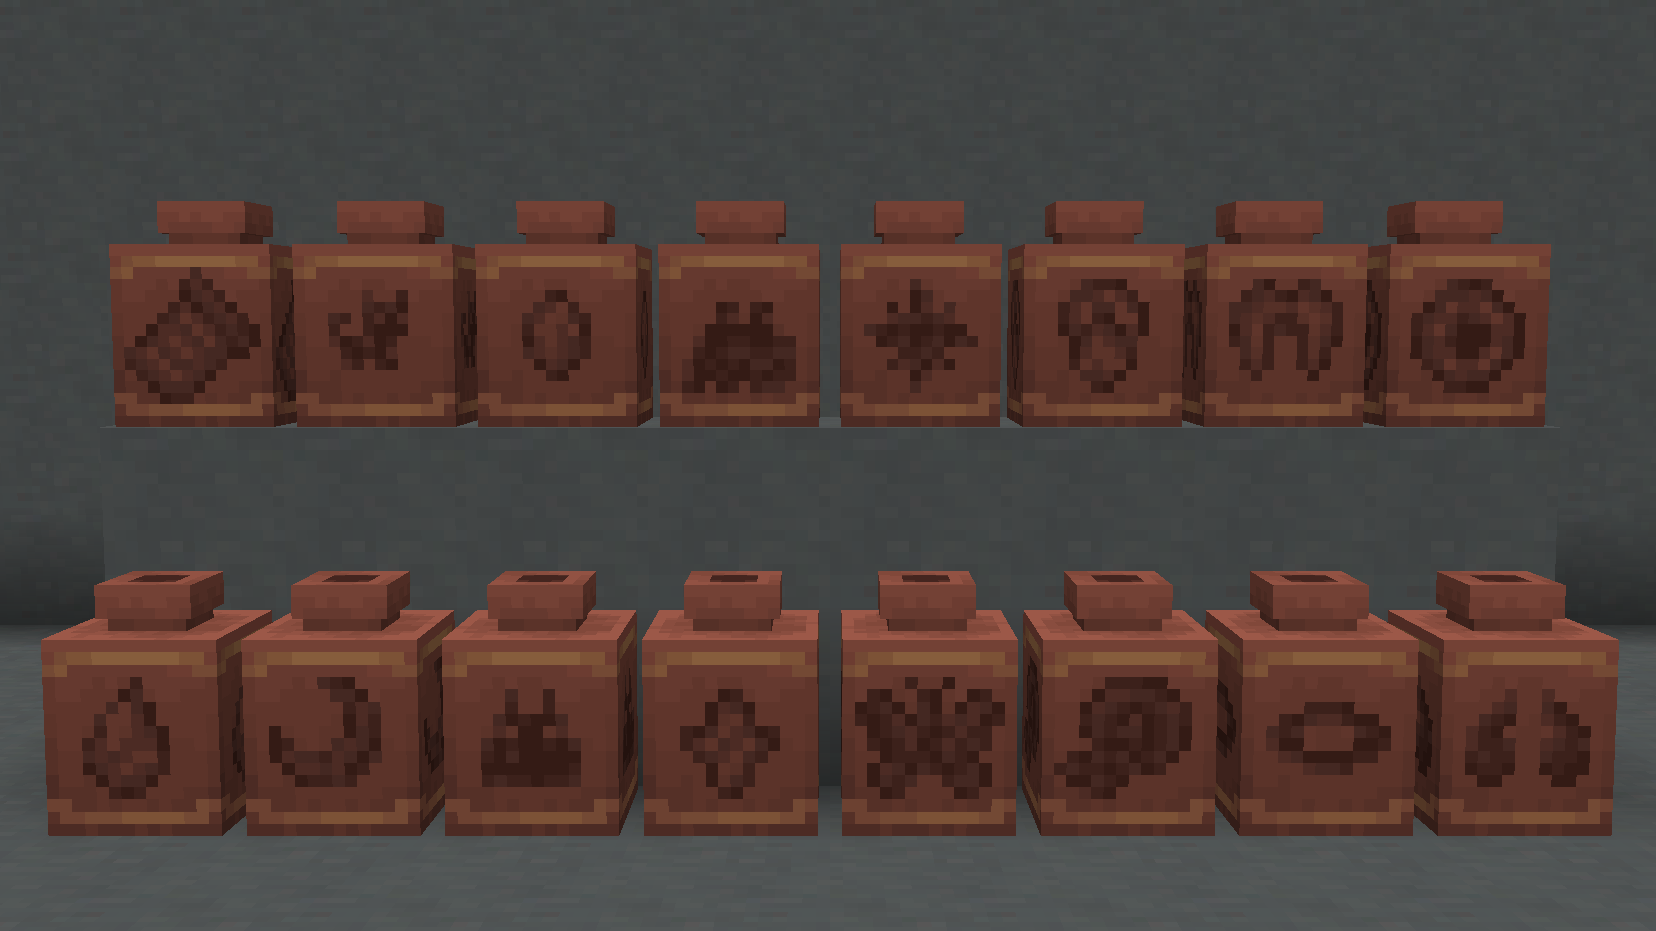 The current 16 pottery sherds added in version 2.1.0